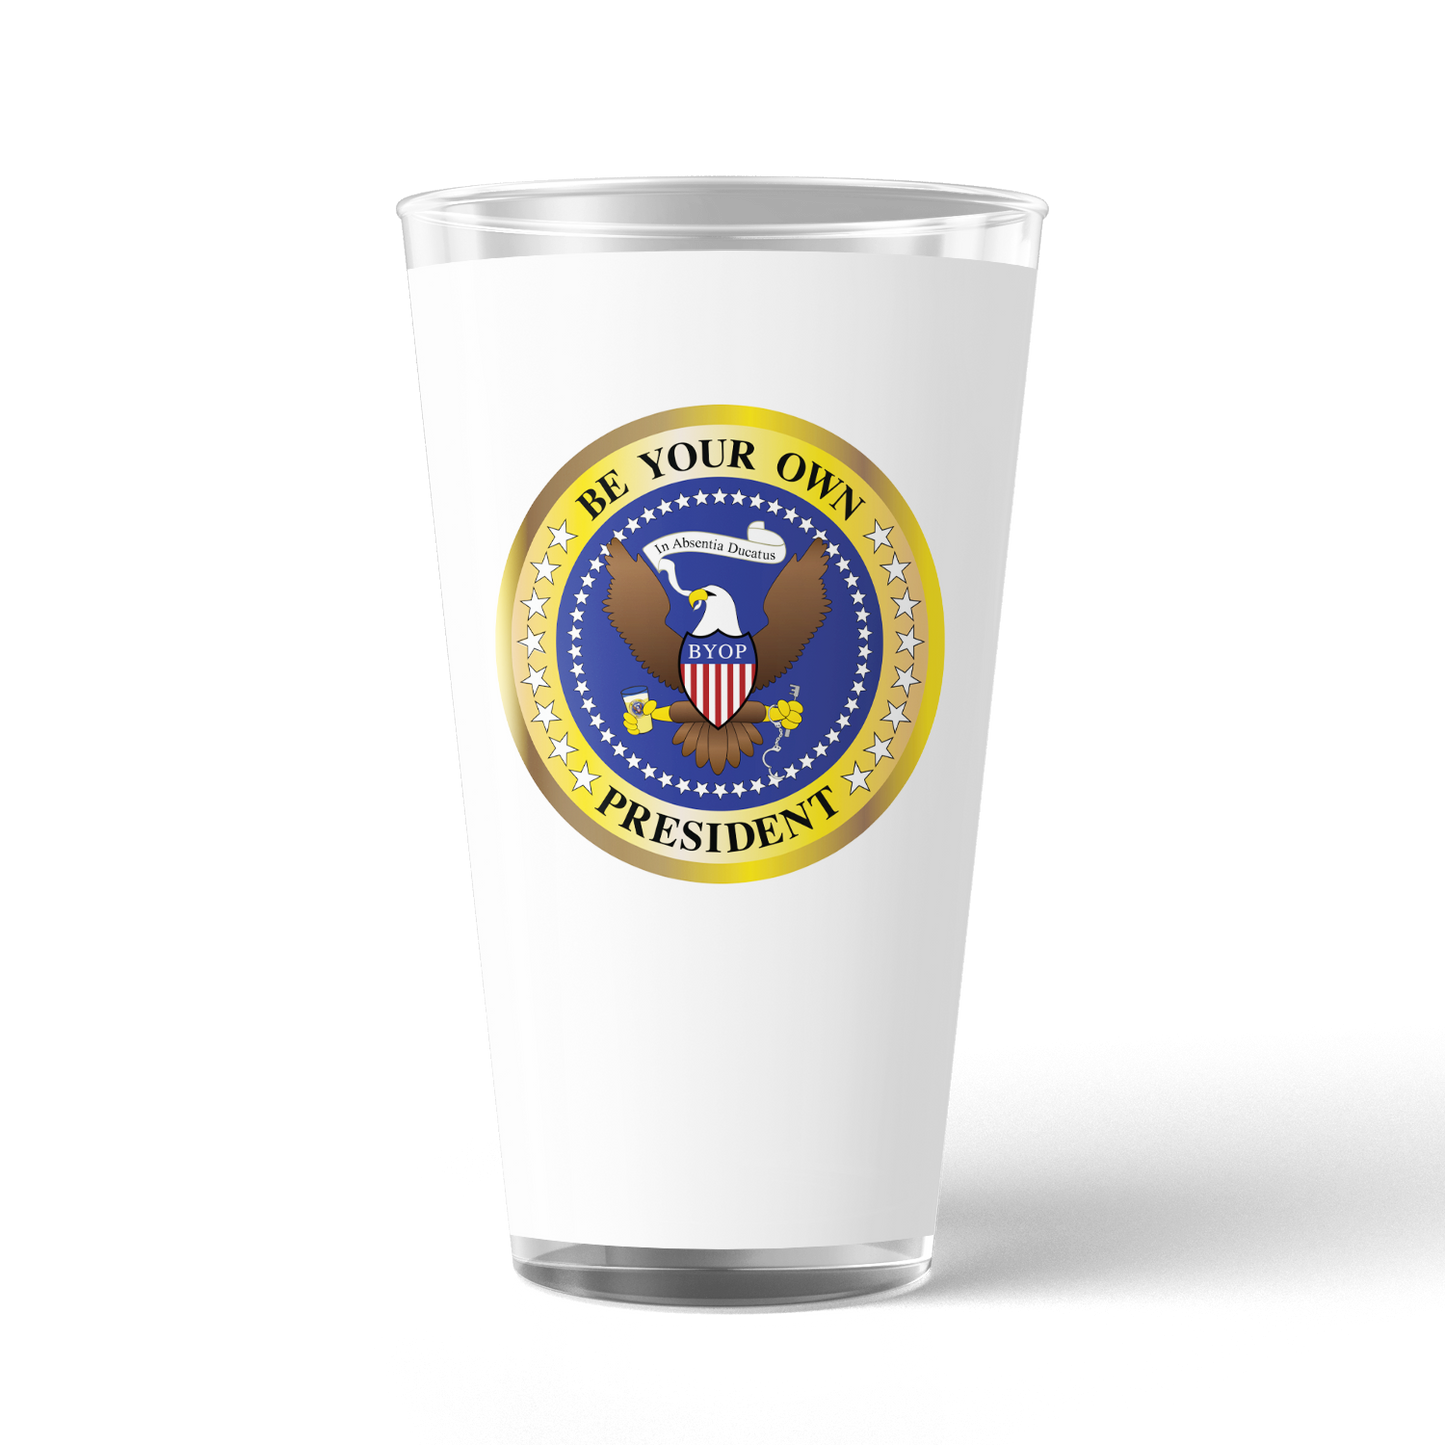 The Late Show with Stephen Colbert Vaso de cerveza benéfico Be Your Own President